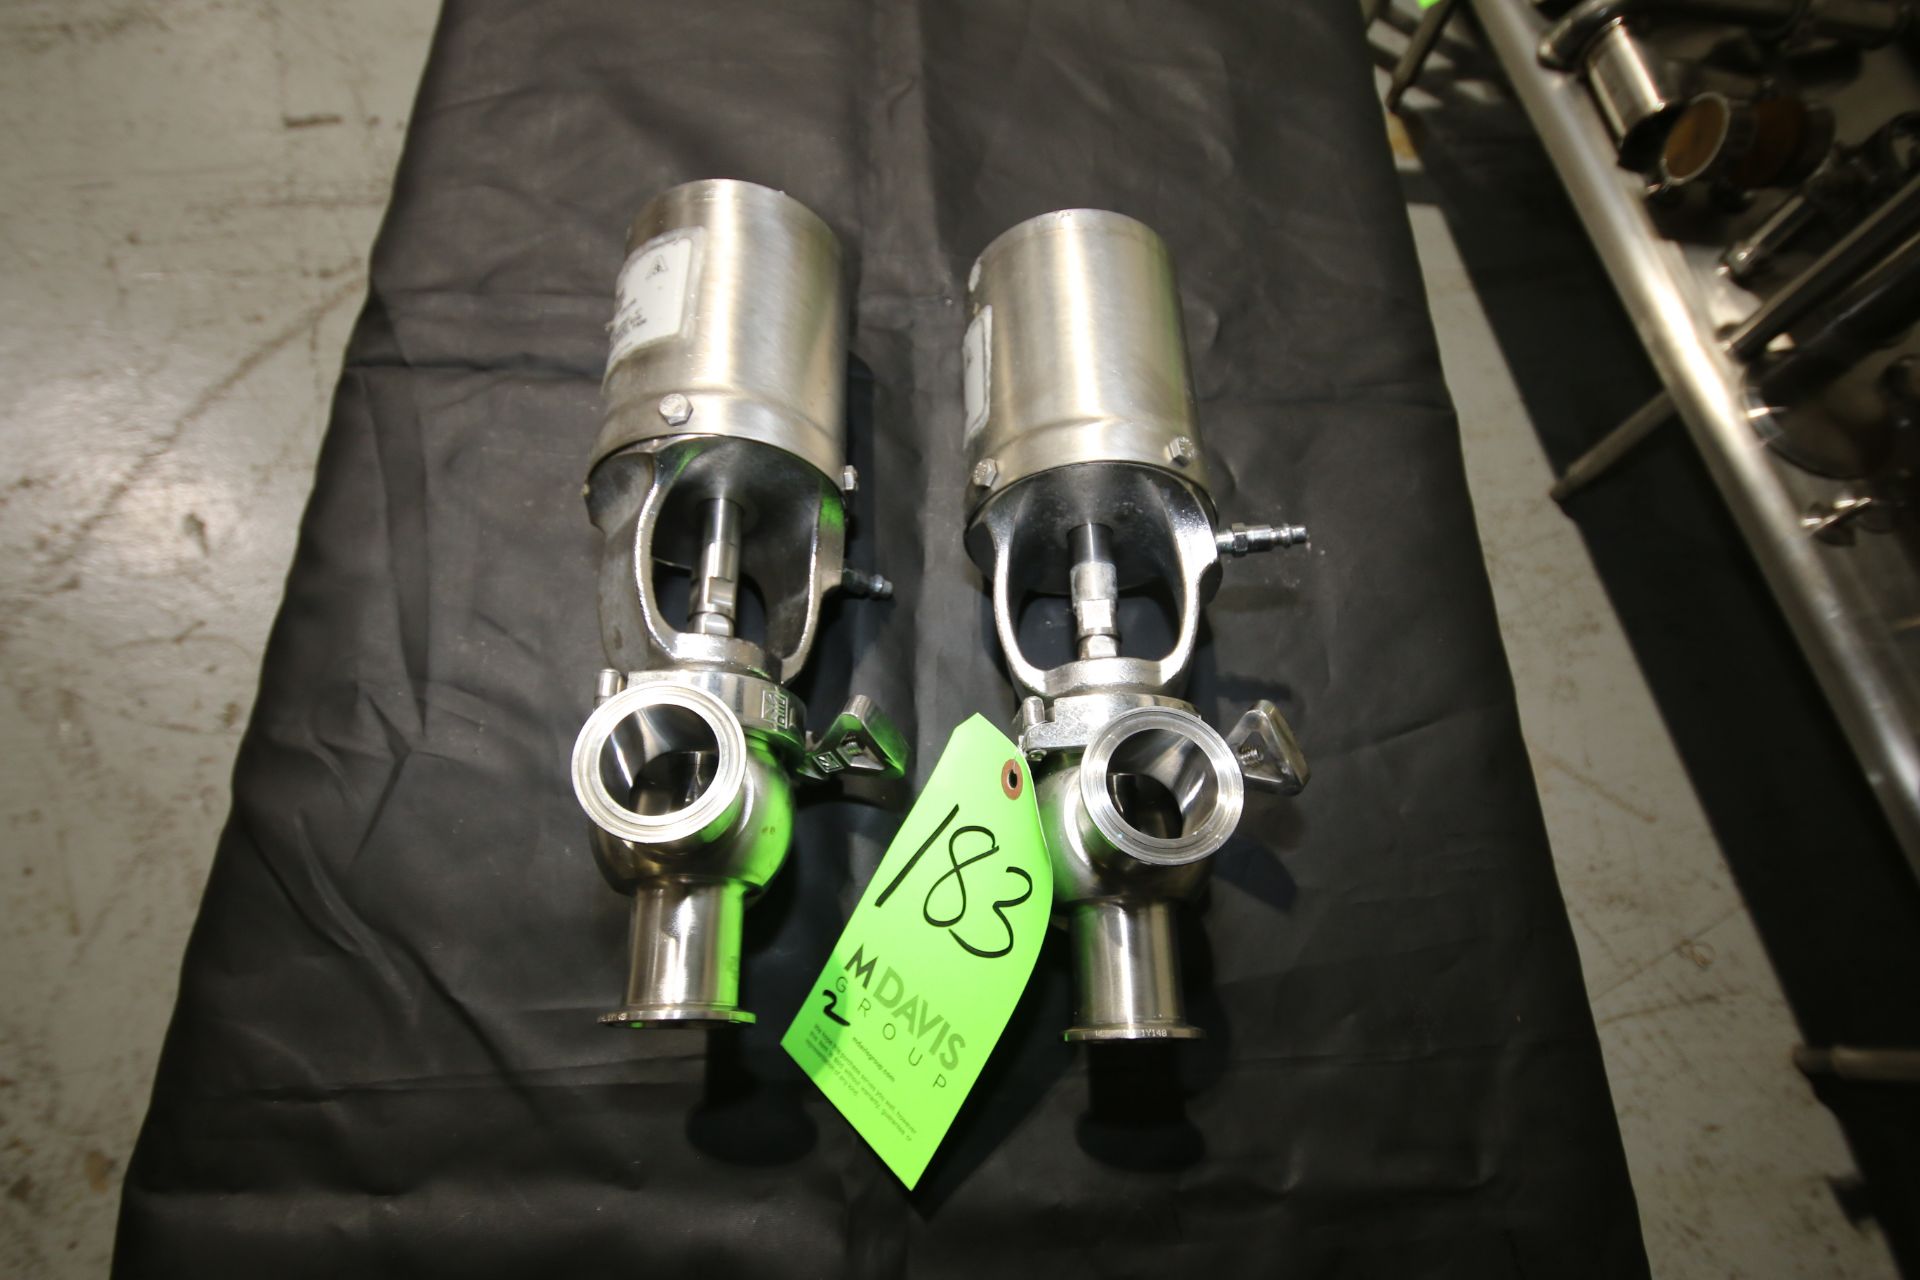 WCB 1-1/2" Clamp Type 3-Way S/S Air Valves, Model WVALVE00163, S/N 384118-05 and S/N 384119-05